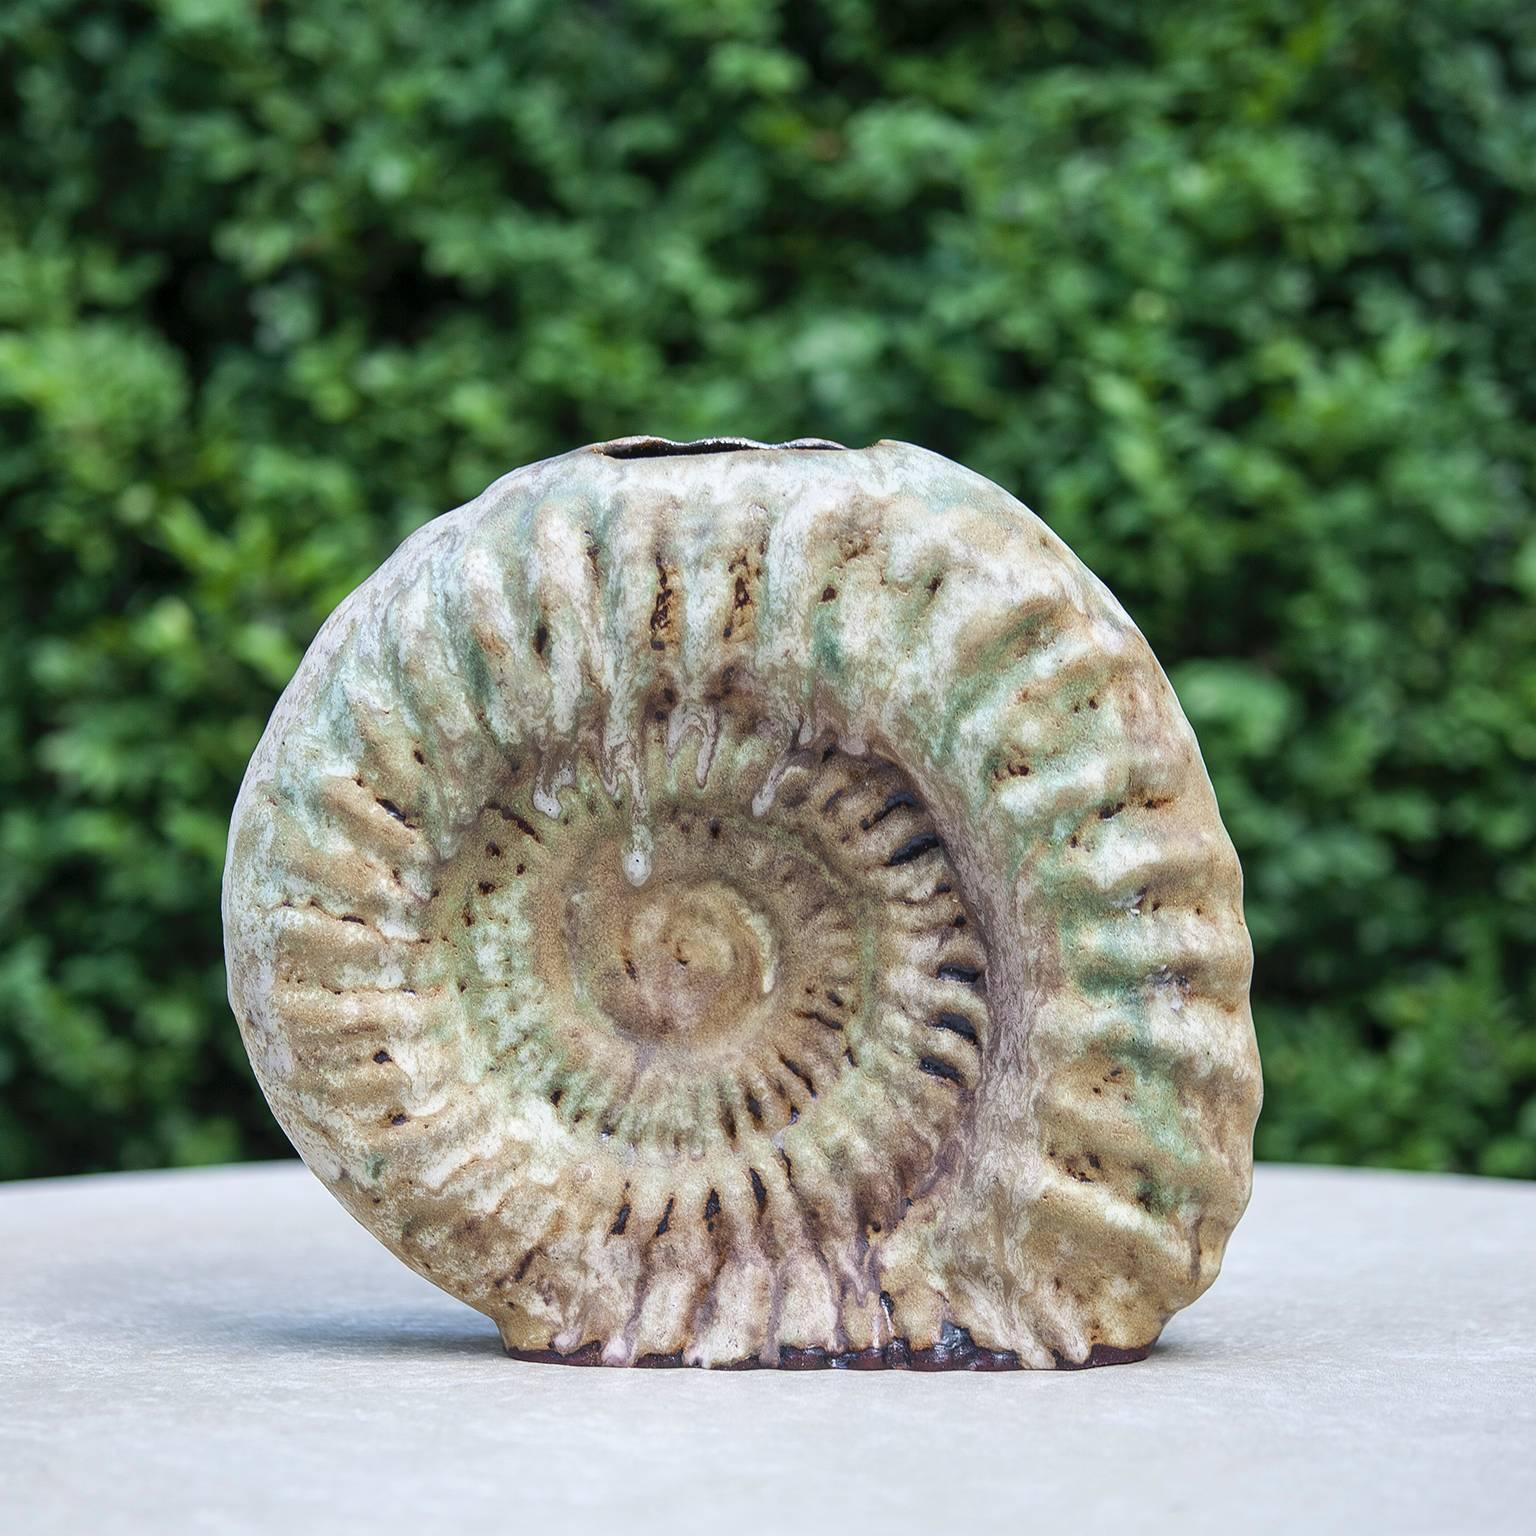 Helmut Schaeffenacker German art pottery / studio ceramic vase, beautiful object in the style a fossilized ammonite and unique piece with artist label.
Helmut Schäffenacker (1921-2010) was a renowned and prolific German ceramic artist, recognized